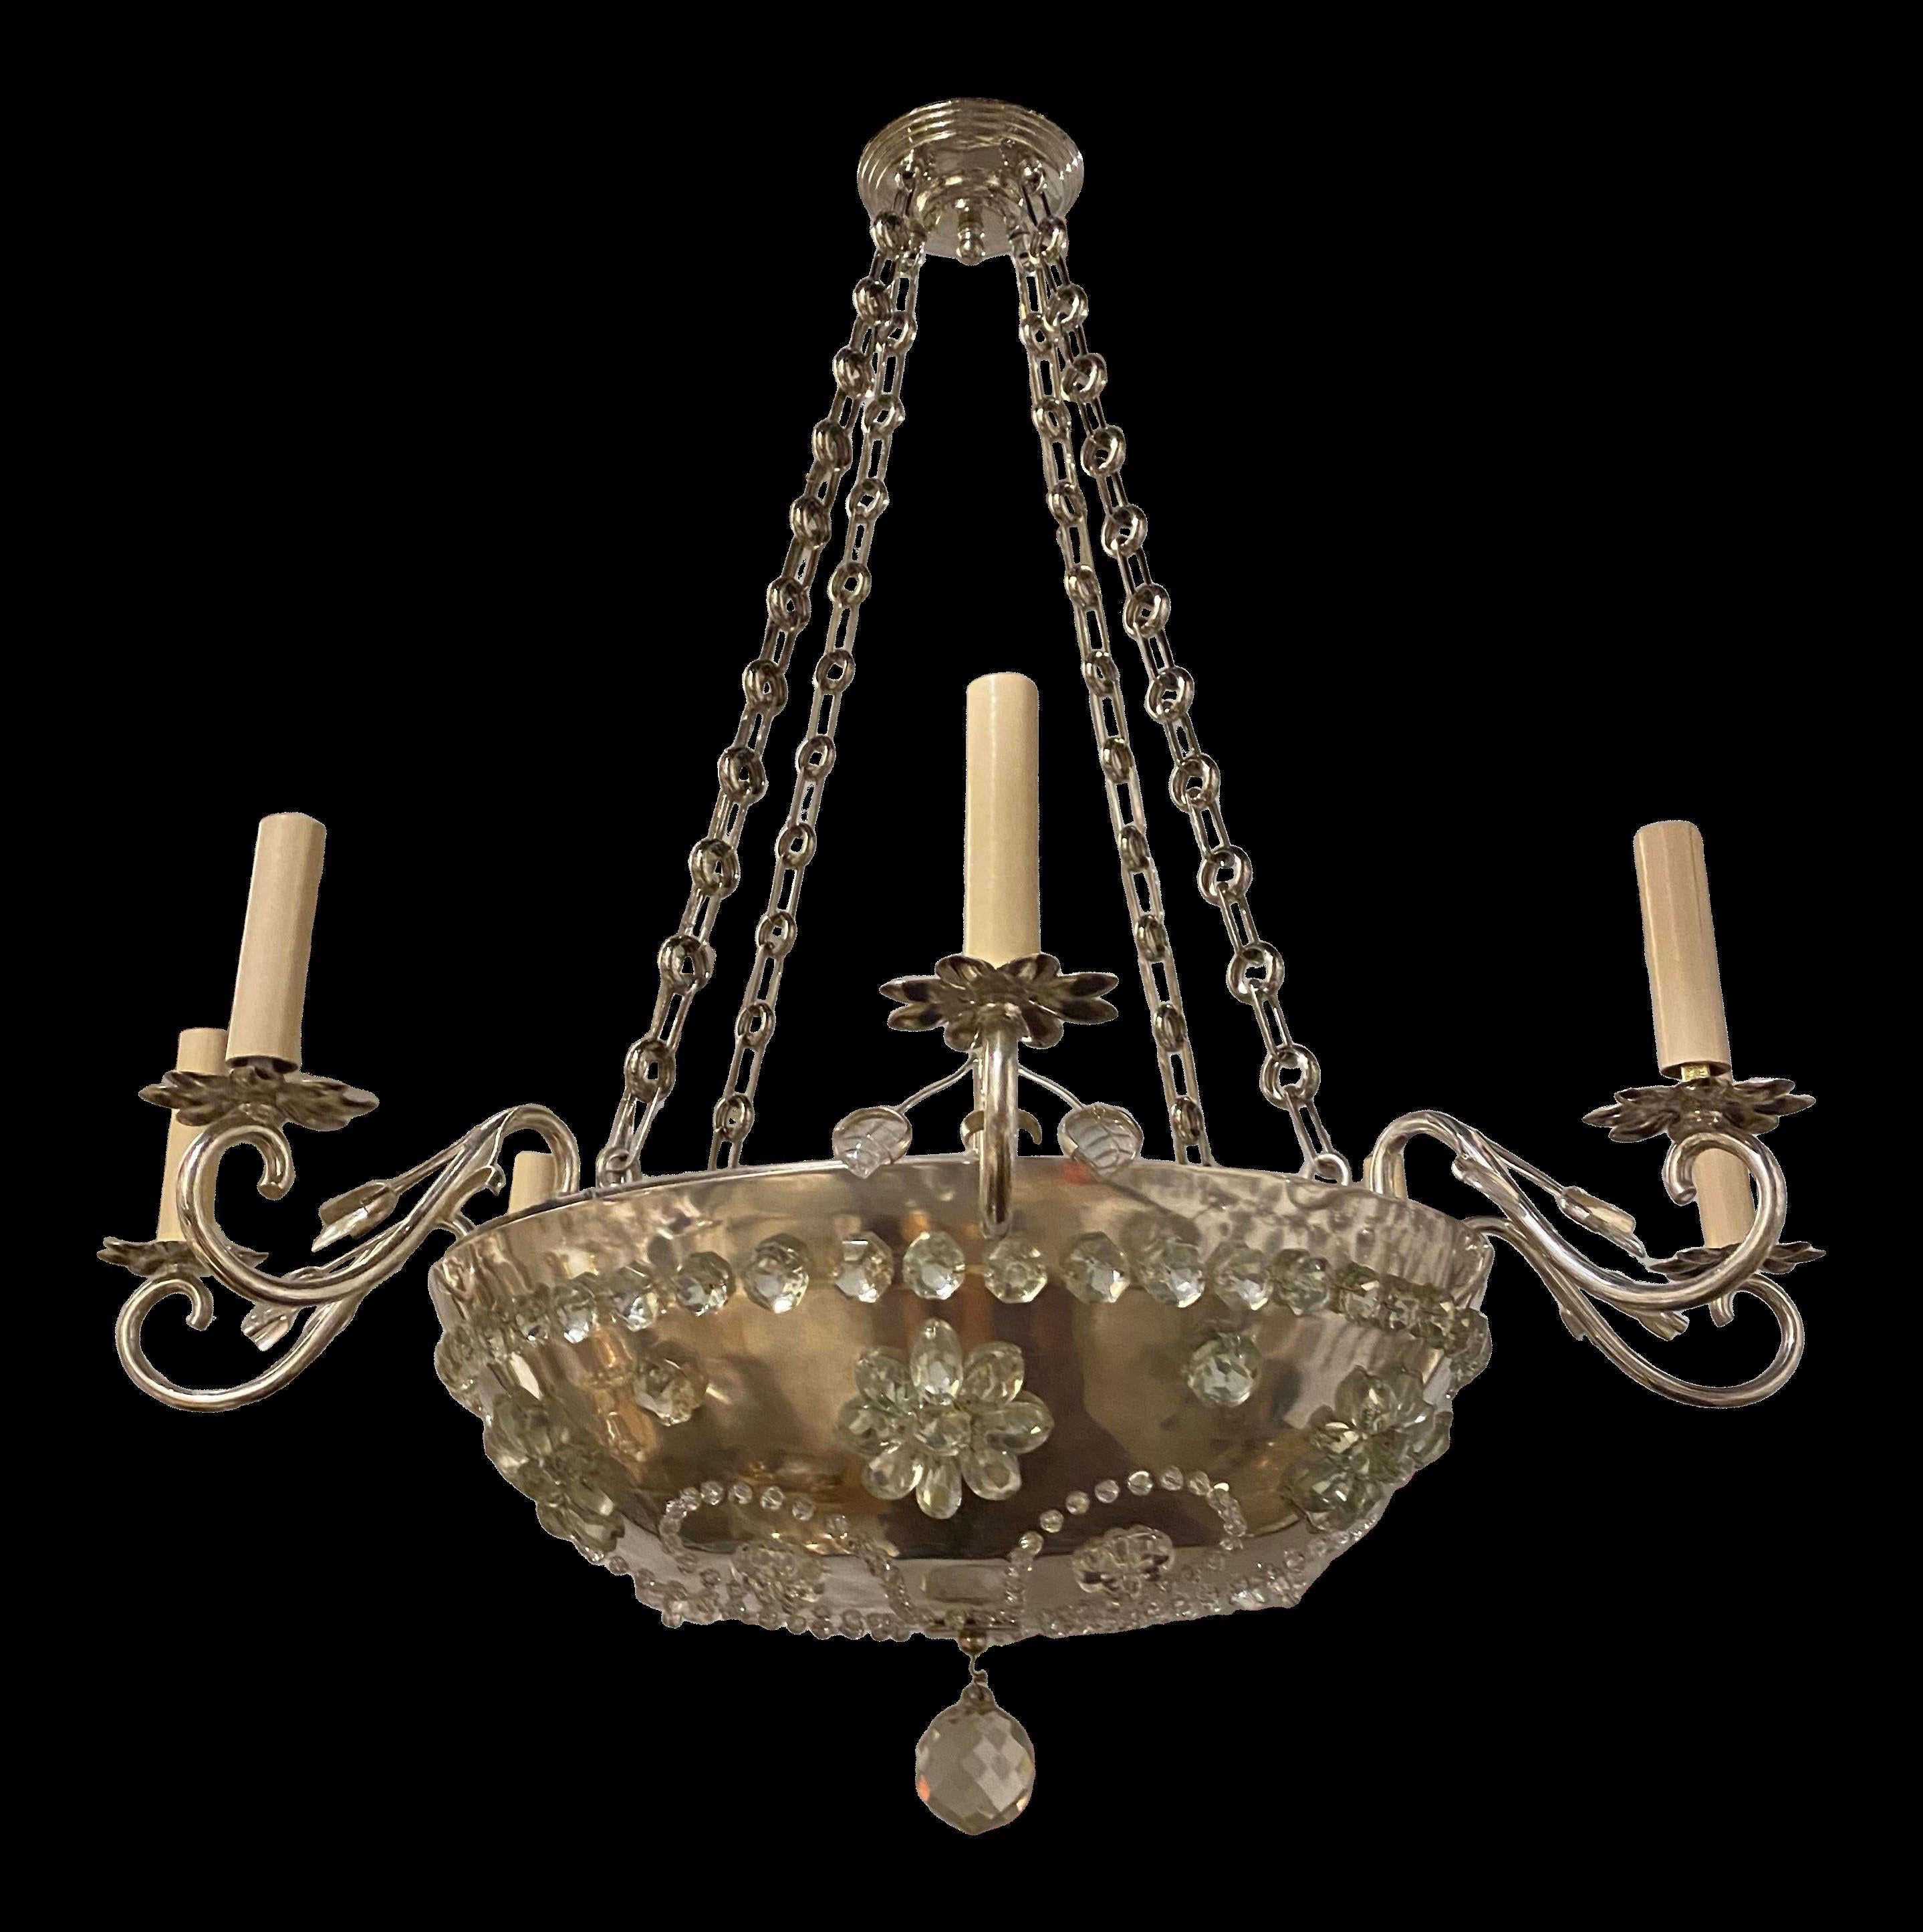 A circa 1930's French silver plated chandelier with flower crystals inset. (Pair available)